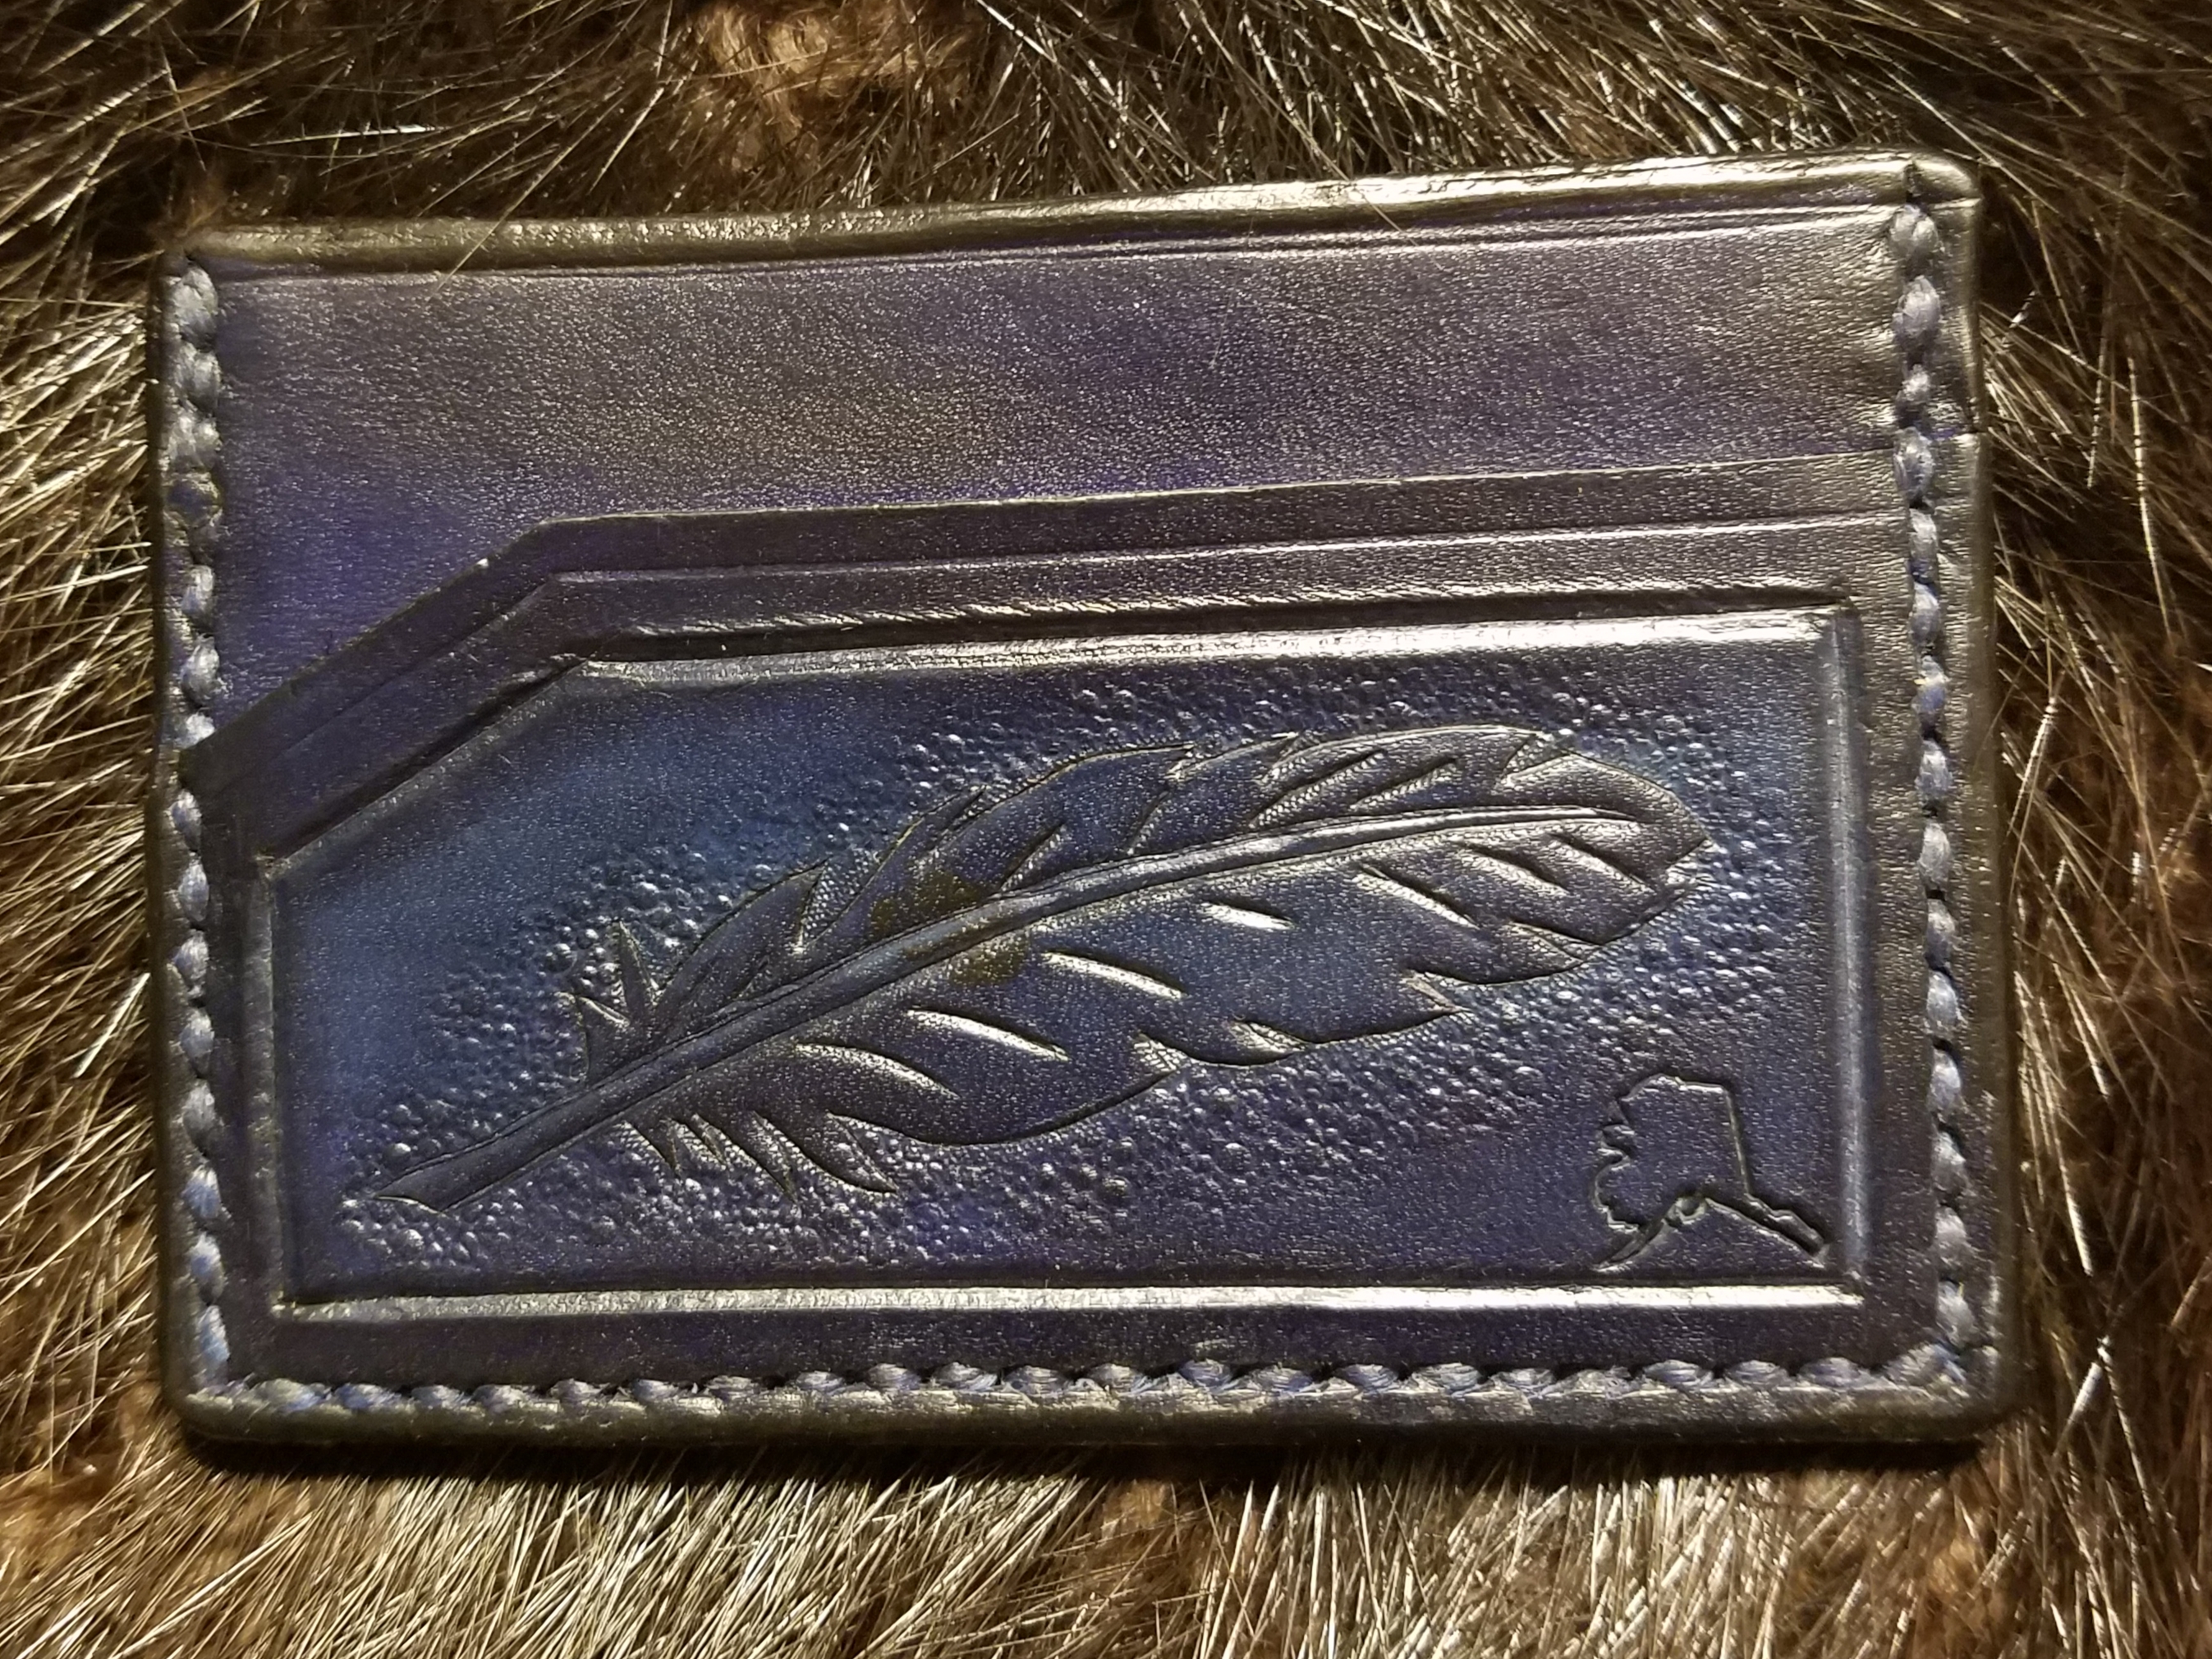 Feather, 3 pocket minimalist wallet, hand tooled and stitched,   $65.00